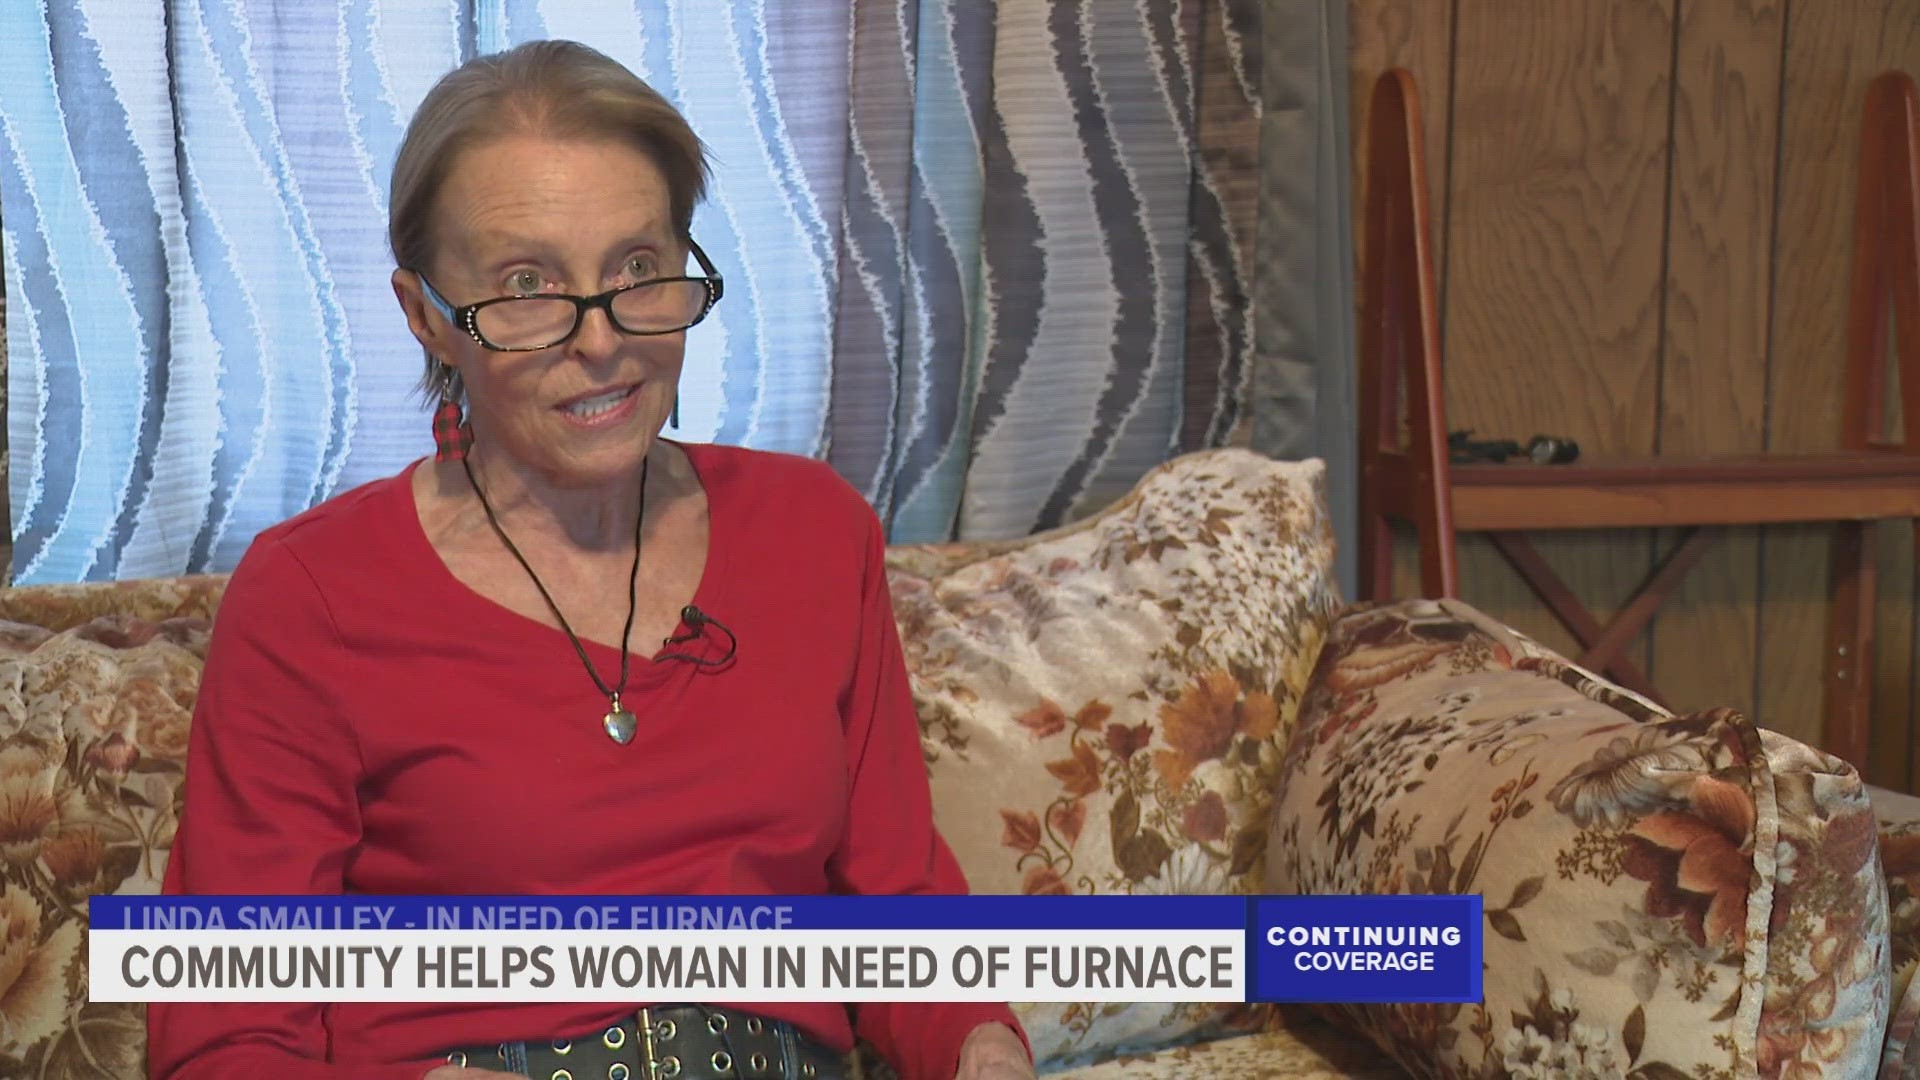 Linda Smalley found her furnace deemed unsafe to continue using. She told 13 ON YOUR SIDE she could not afford a new one. Now community members are reaching out.